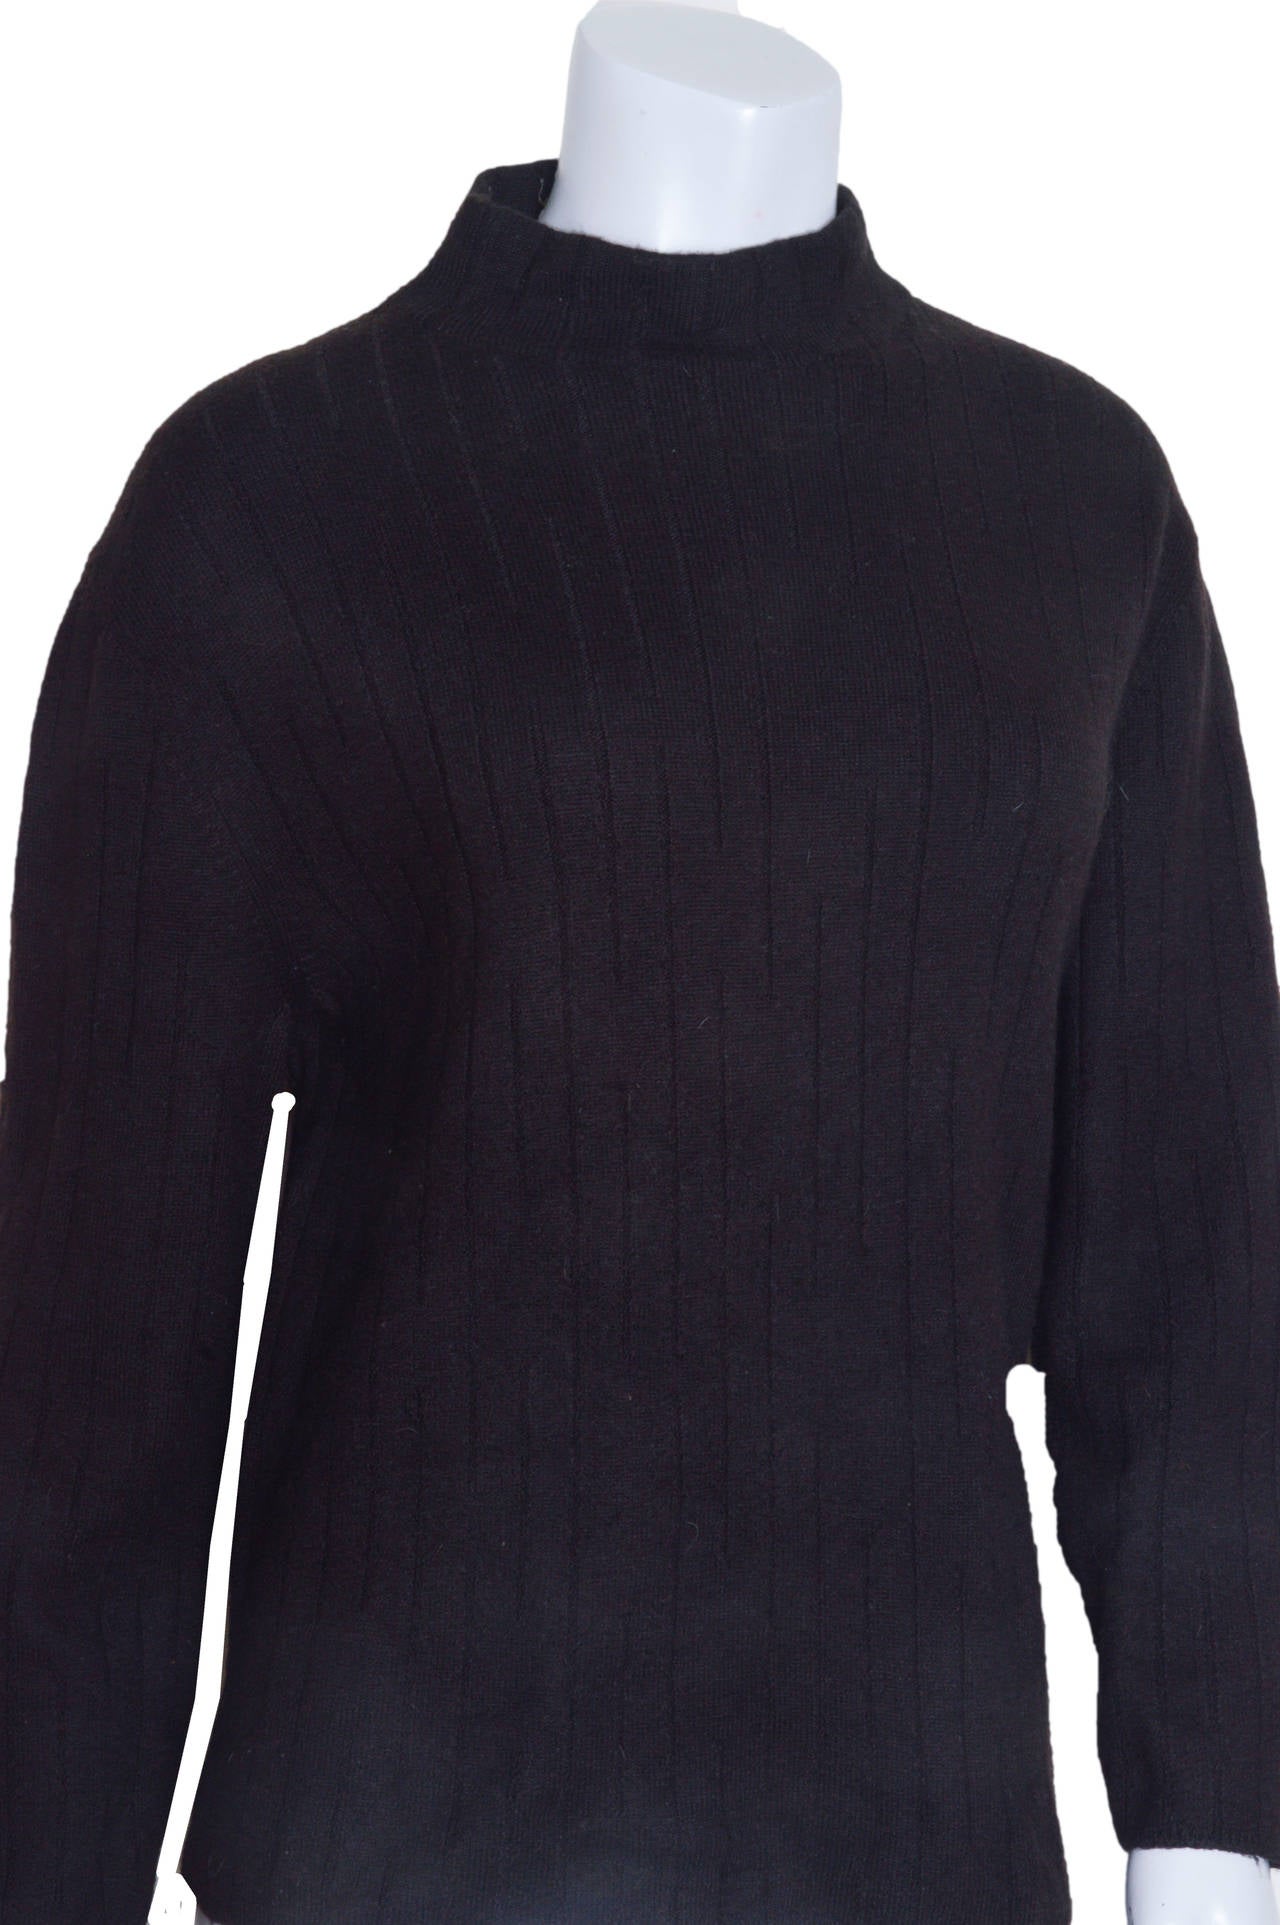 Women's Hermes Cashmere and Wool Brown Sweater